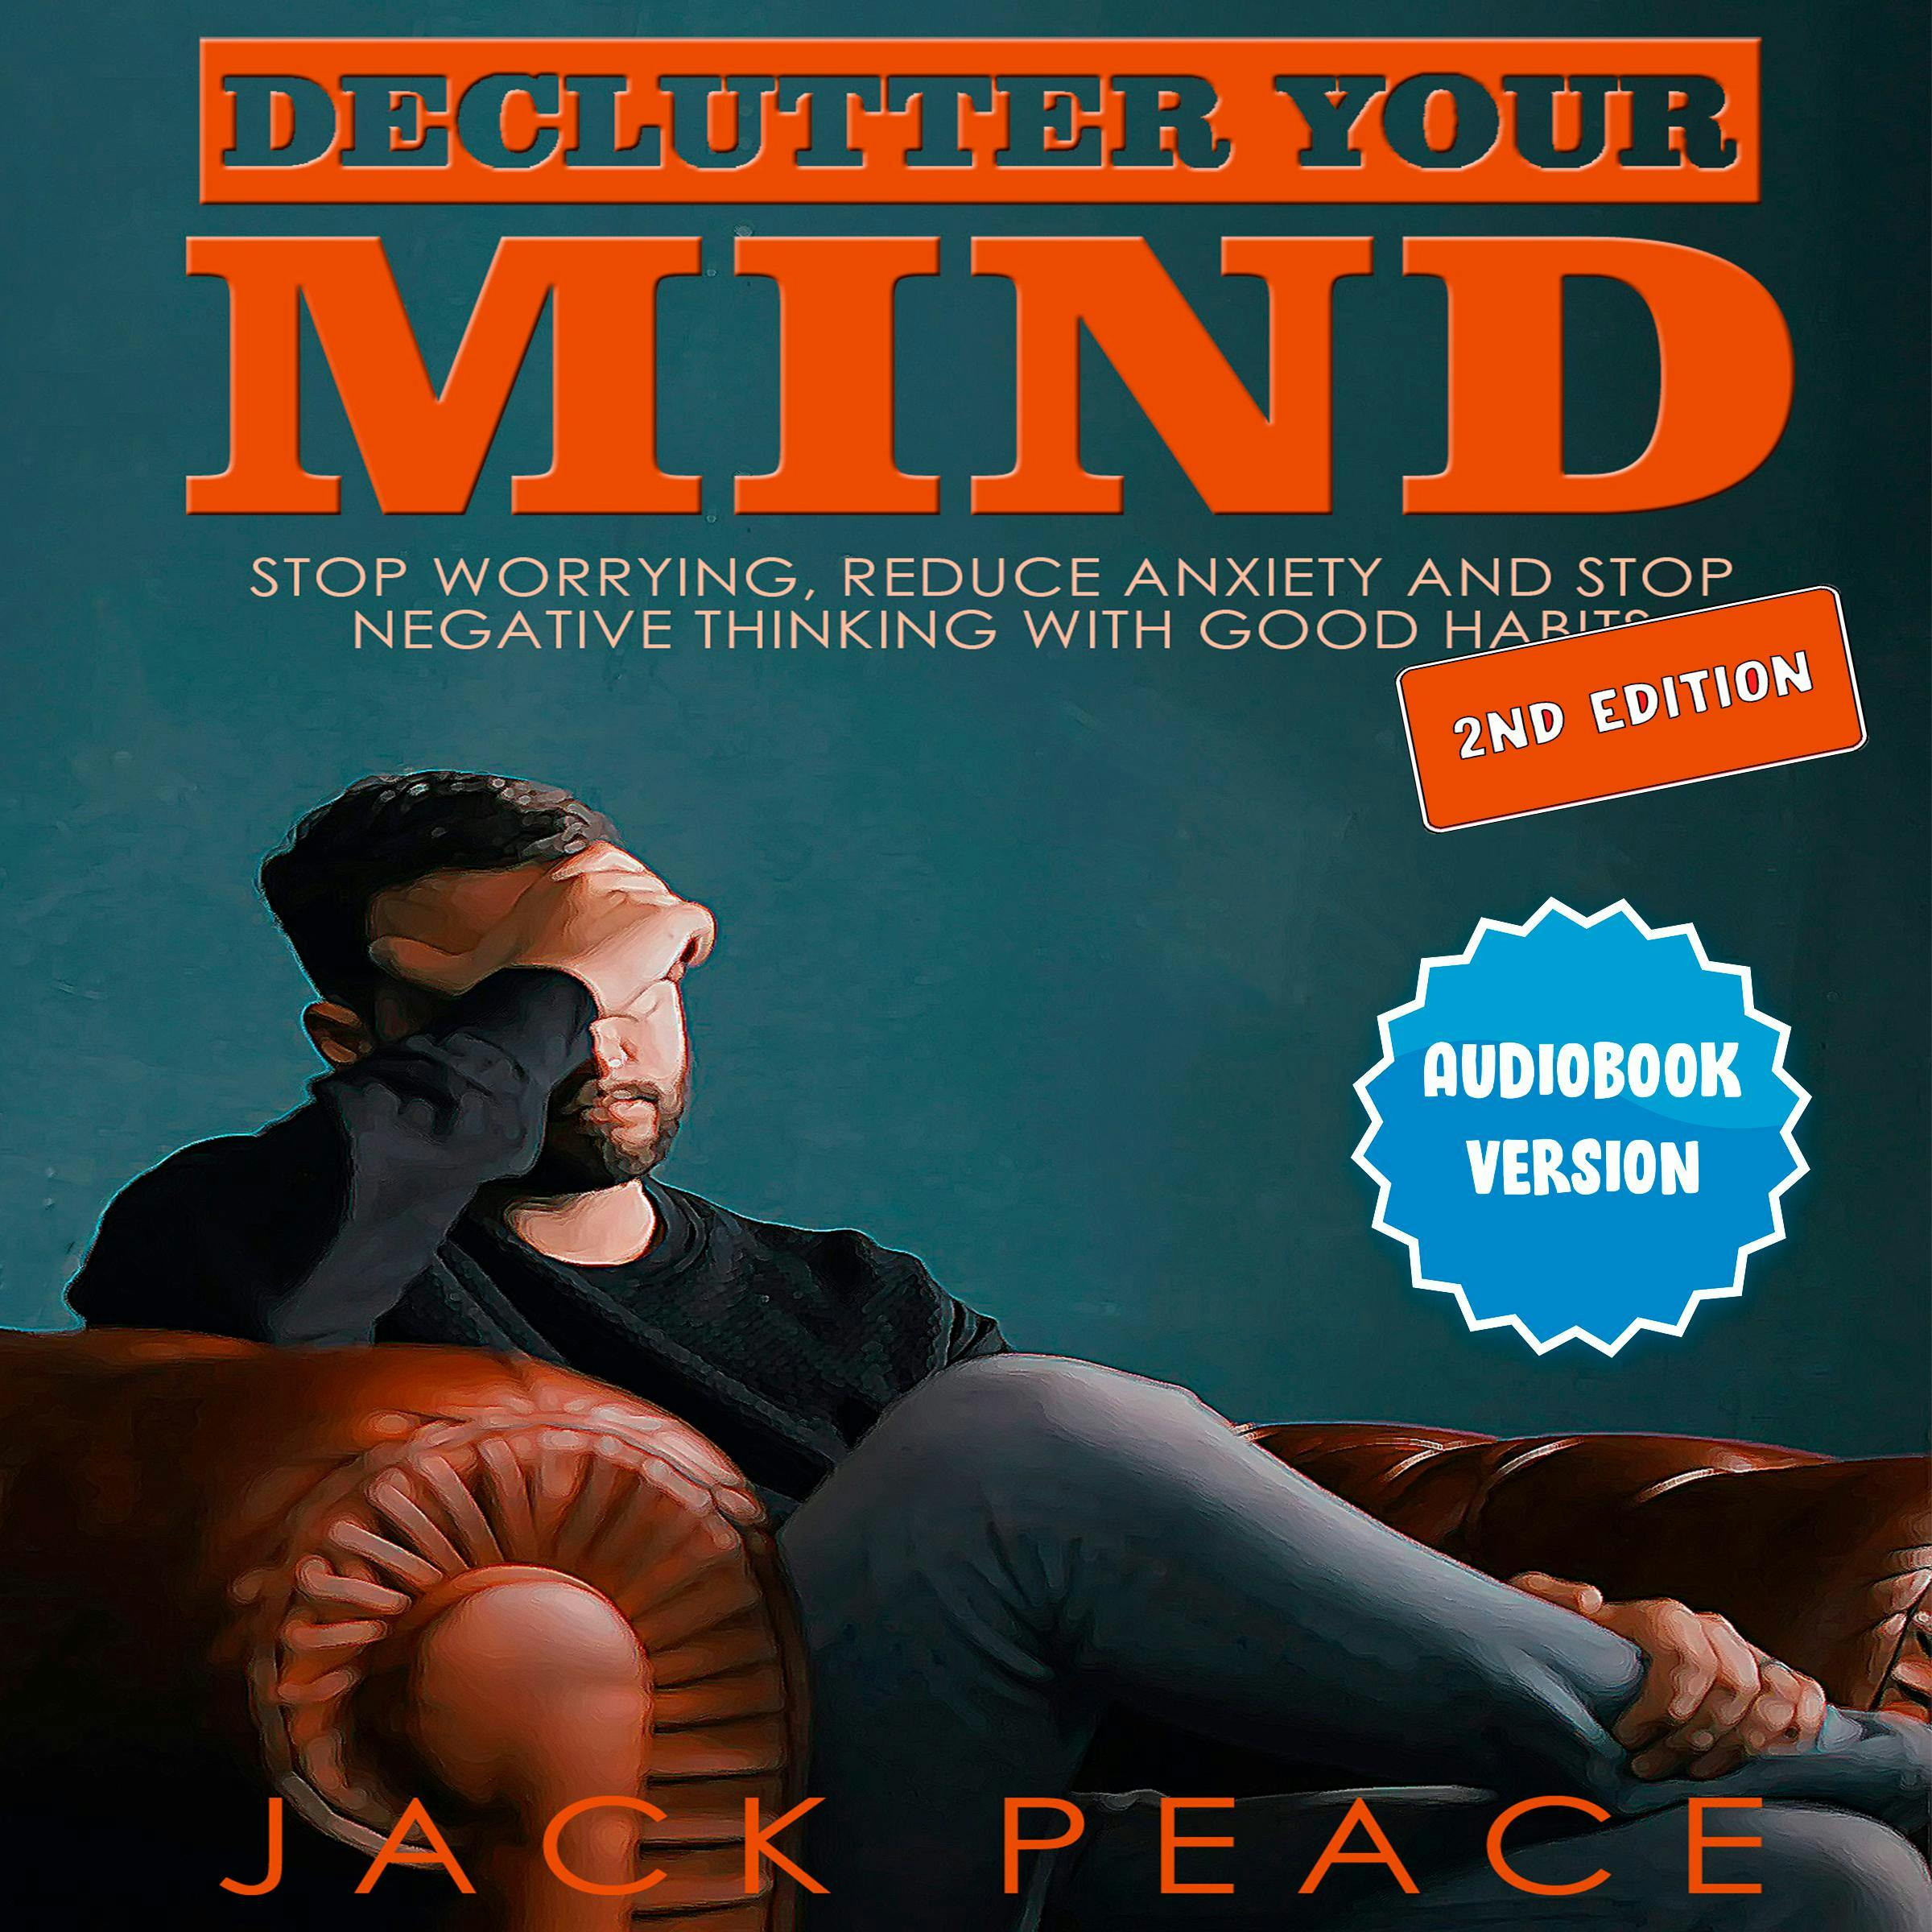 Declutter Your Mind (2nd edition): Stop Worrying, Reduce Anxiety and Stop Negative Thinking with Good Habits - Jack Peace